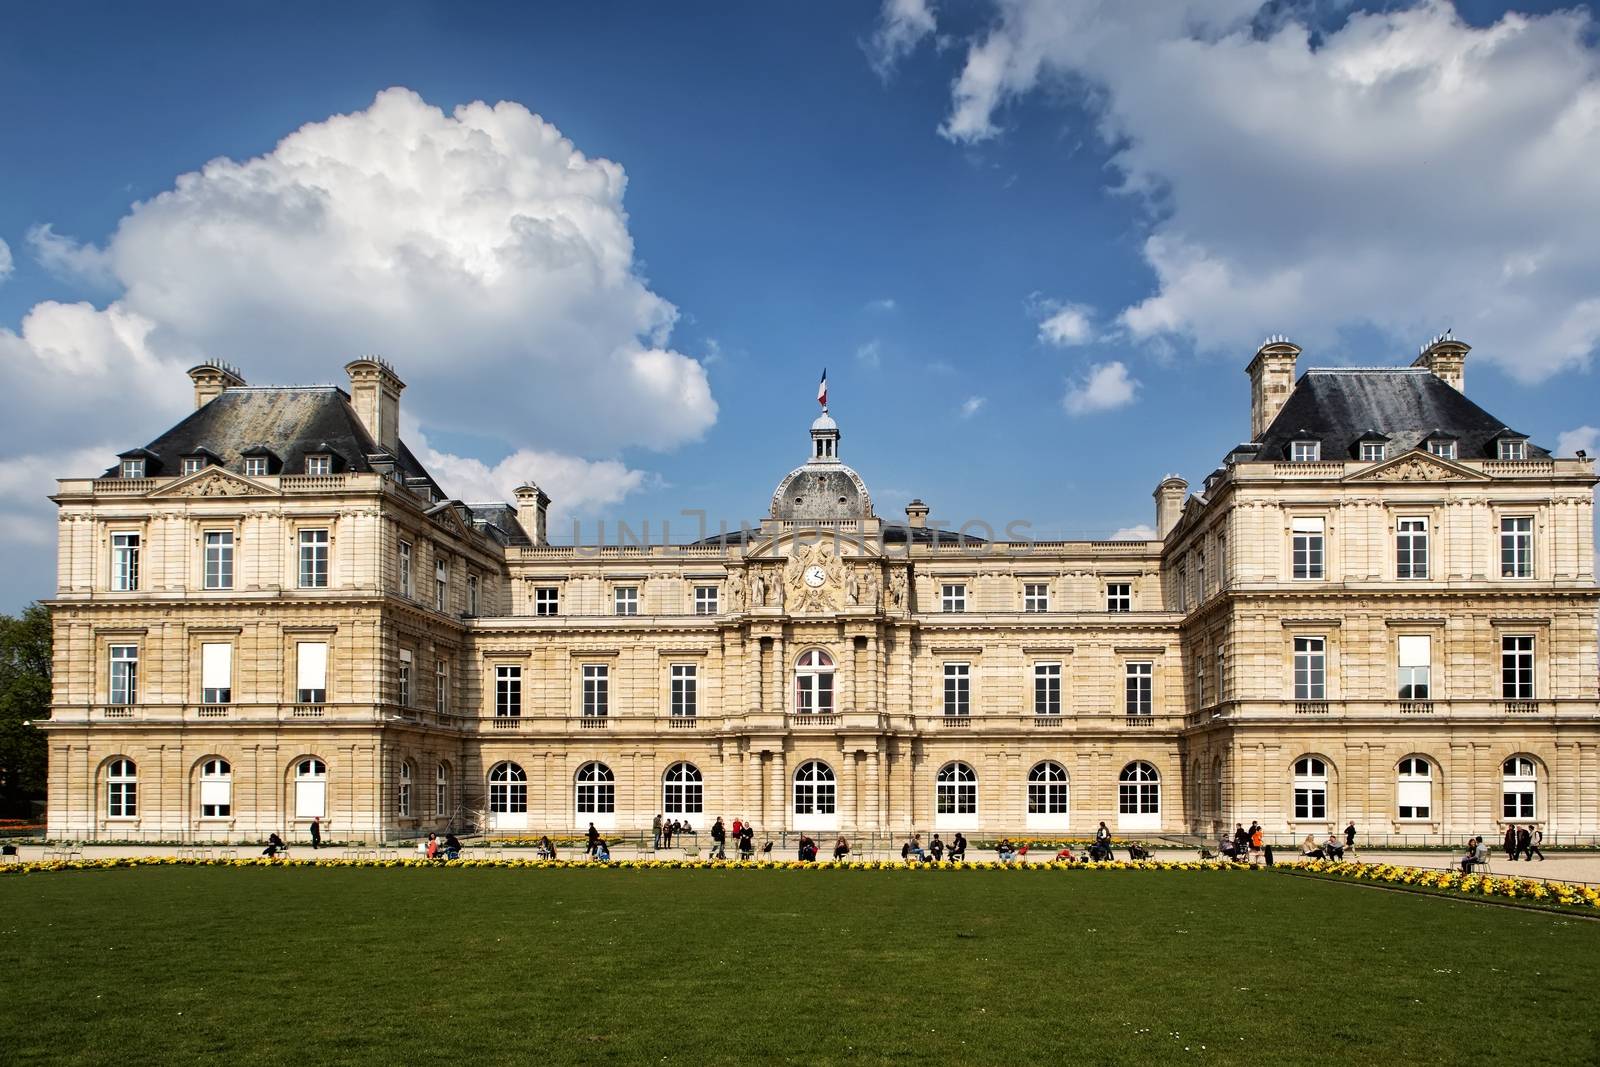 Luxemburg Palace was originally built to be the royal residence of the regent Marie de Medicis, mother of Louis XIII of France.